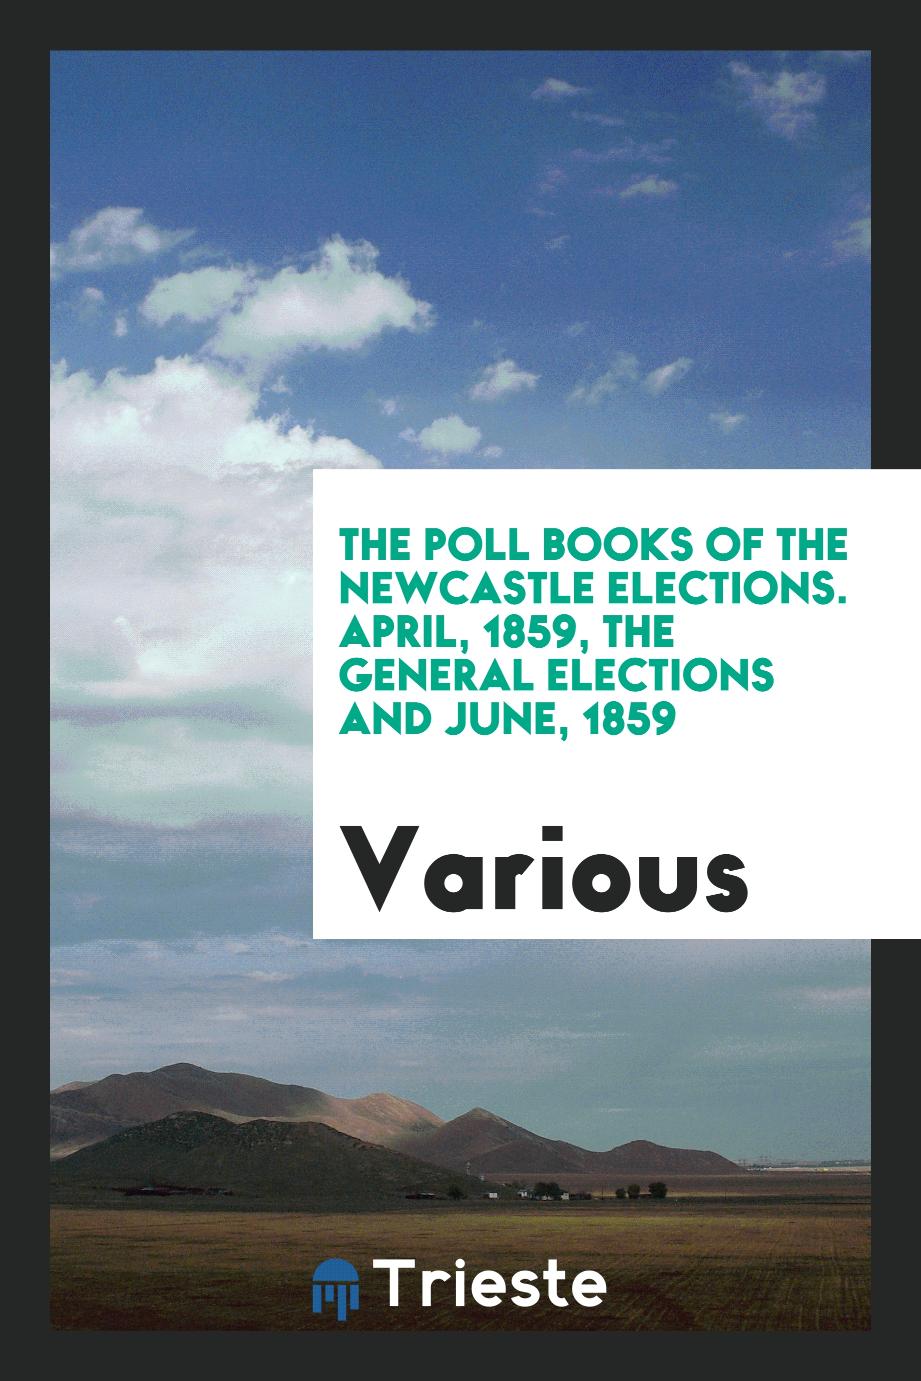 The poll books of the Newcastle elections. April, 1859, the general elections and June, 1859